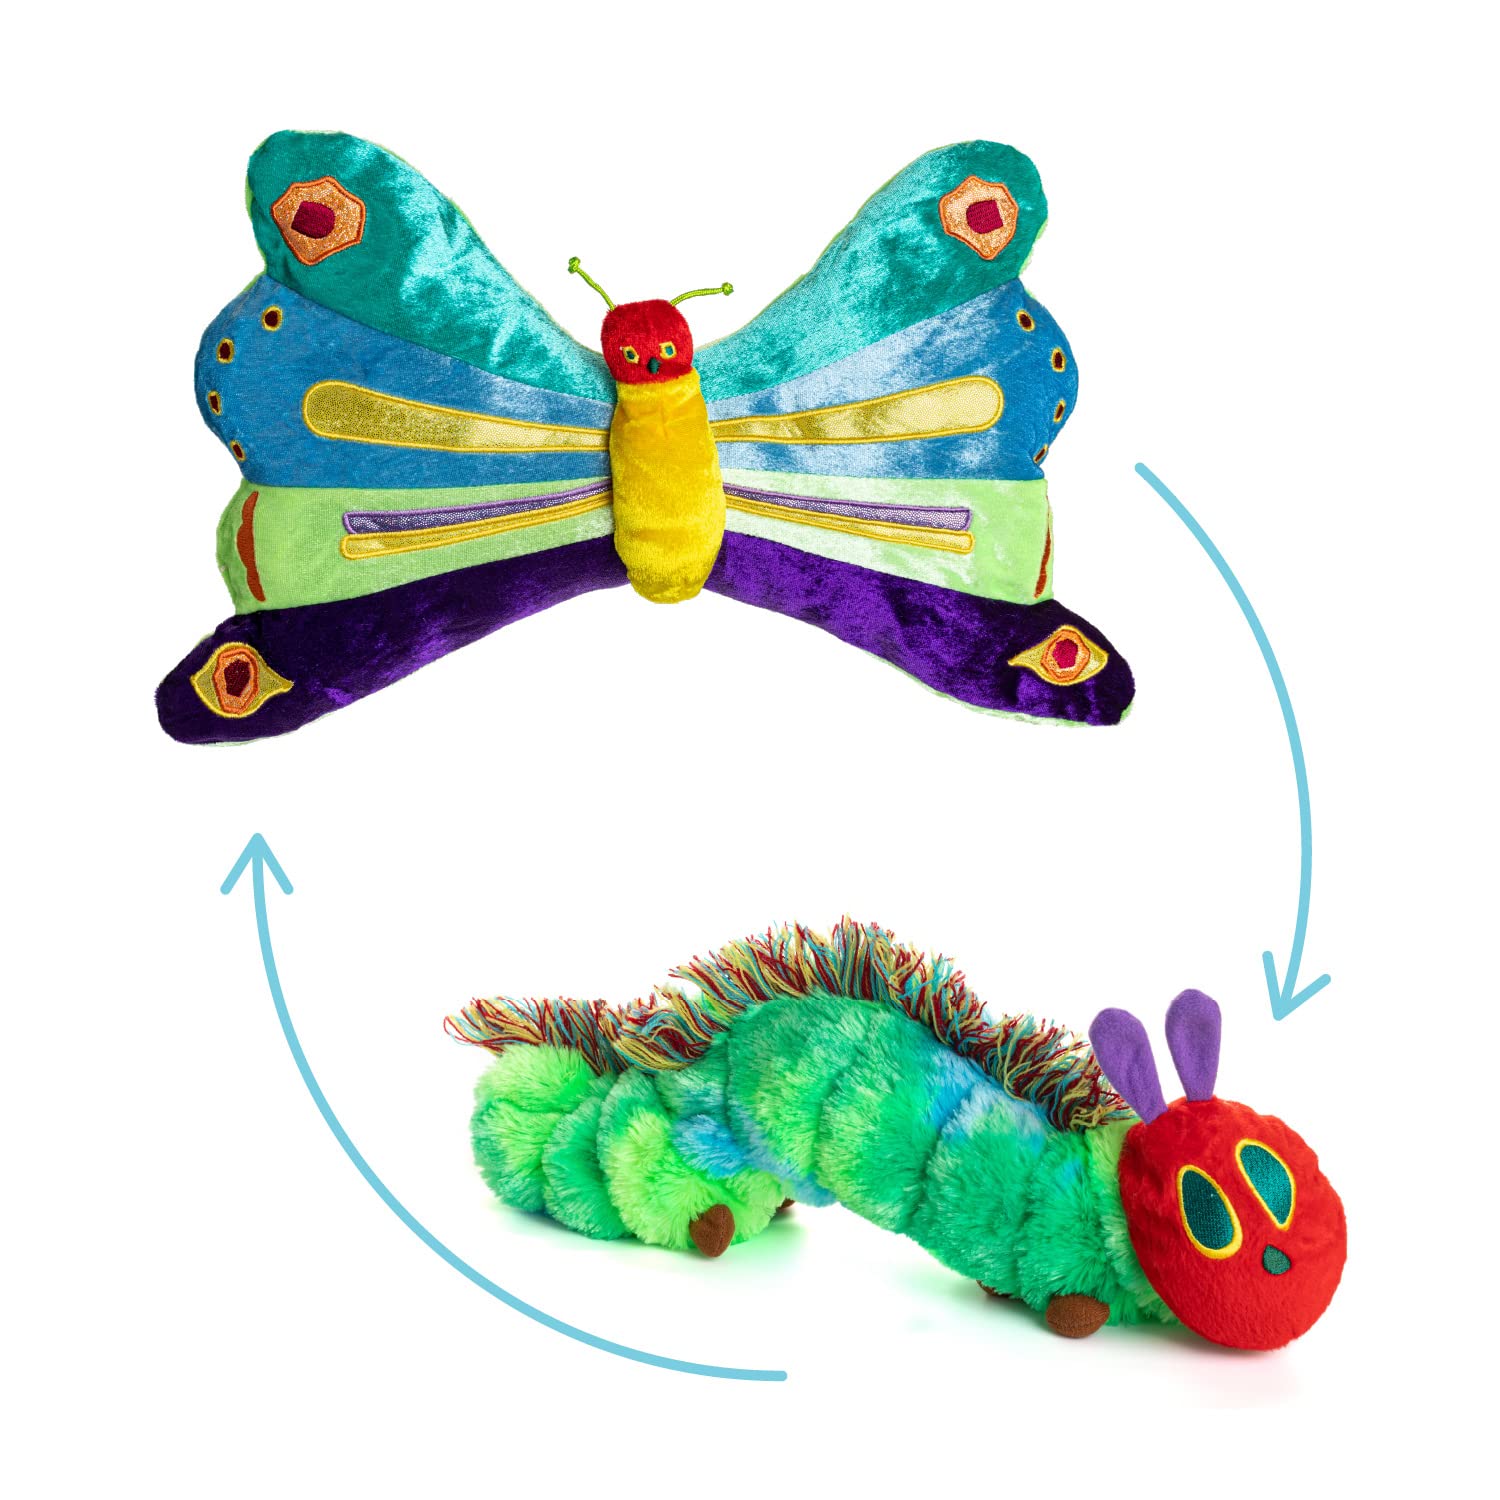 Kids Preferred The World of Eric Carle: The Very Hungry Caterpillar Reversi